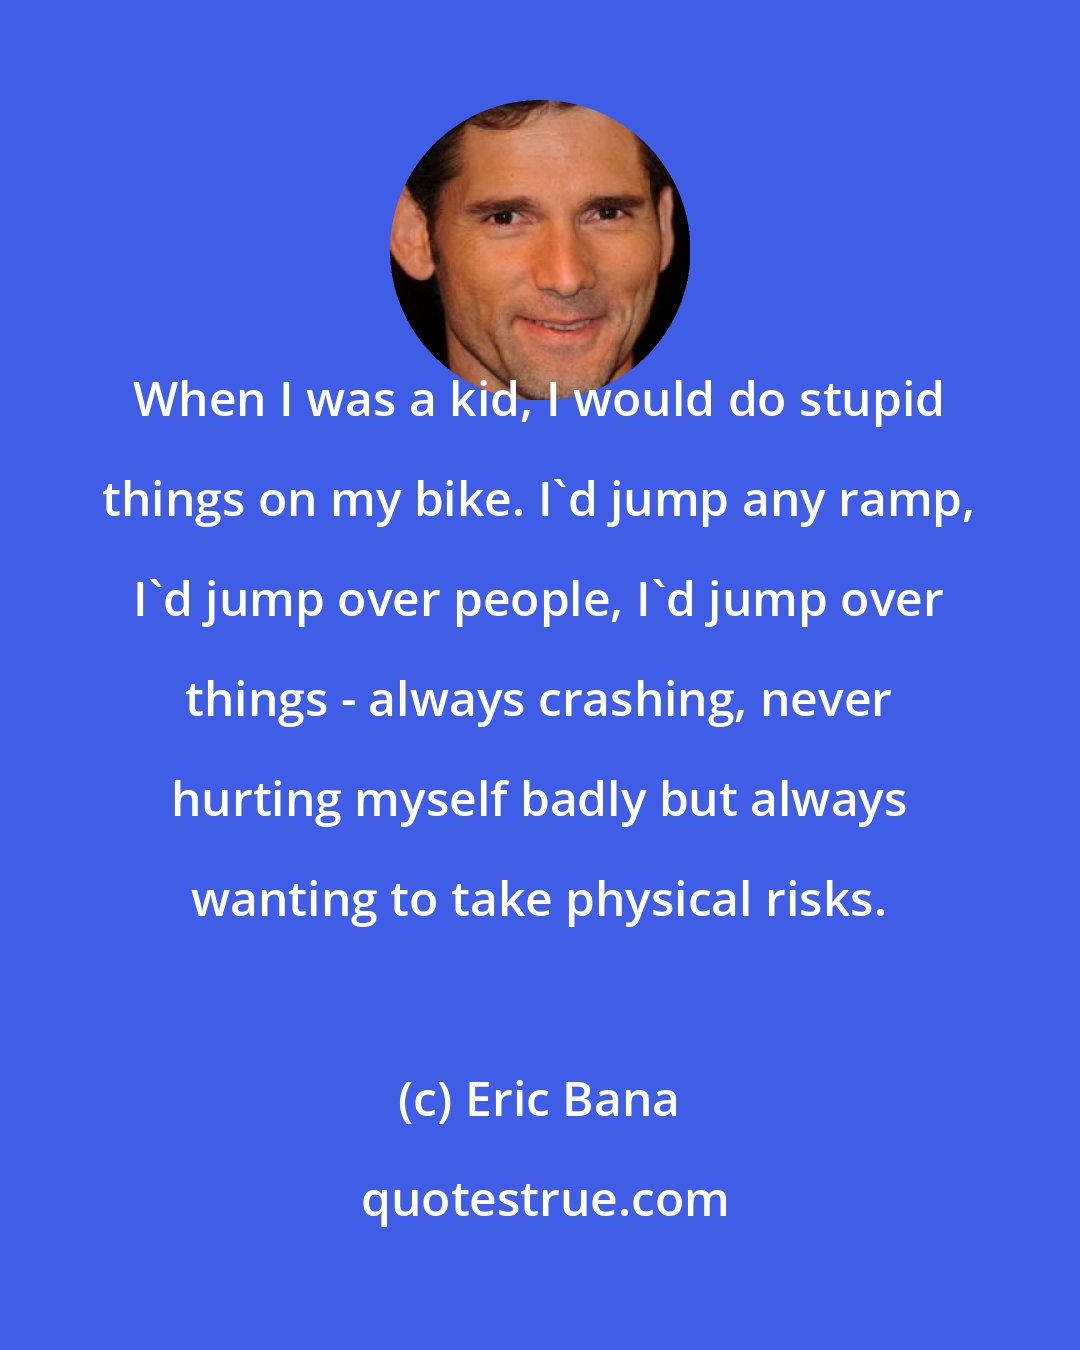 Eric Bana: When I was a kid, I would do stupid things on my bike. I'd jump any ramp, I'd jump over people, I'd jump over things - always crashing, never hurting myself badly but always wanting to take physical risks.